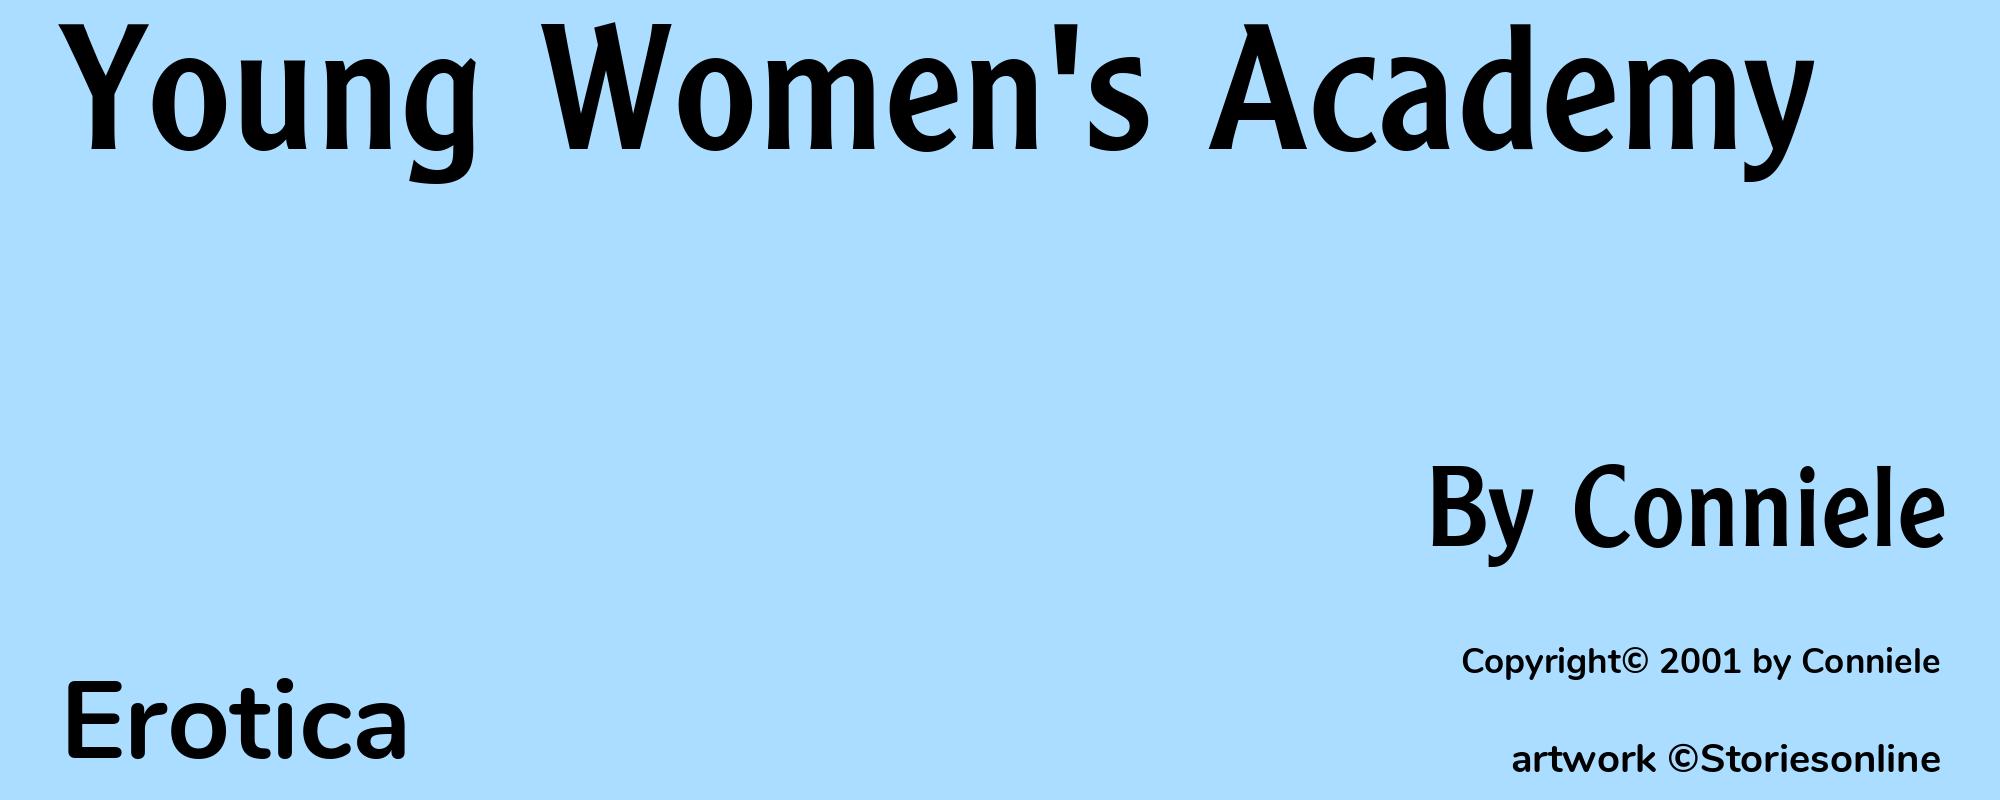 Young Women's Academy - Cover